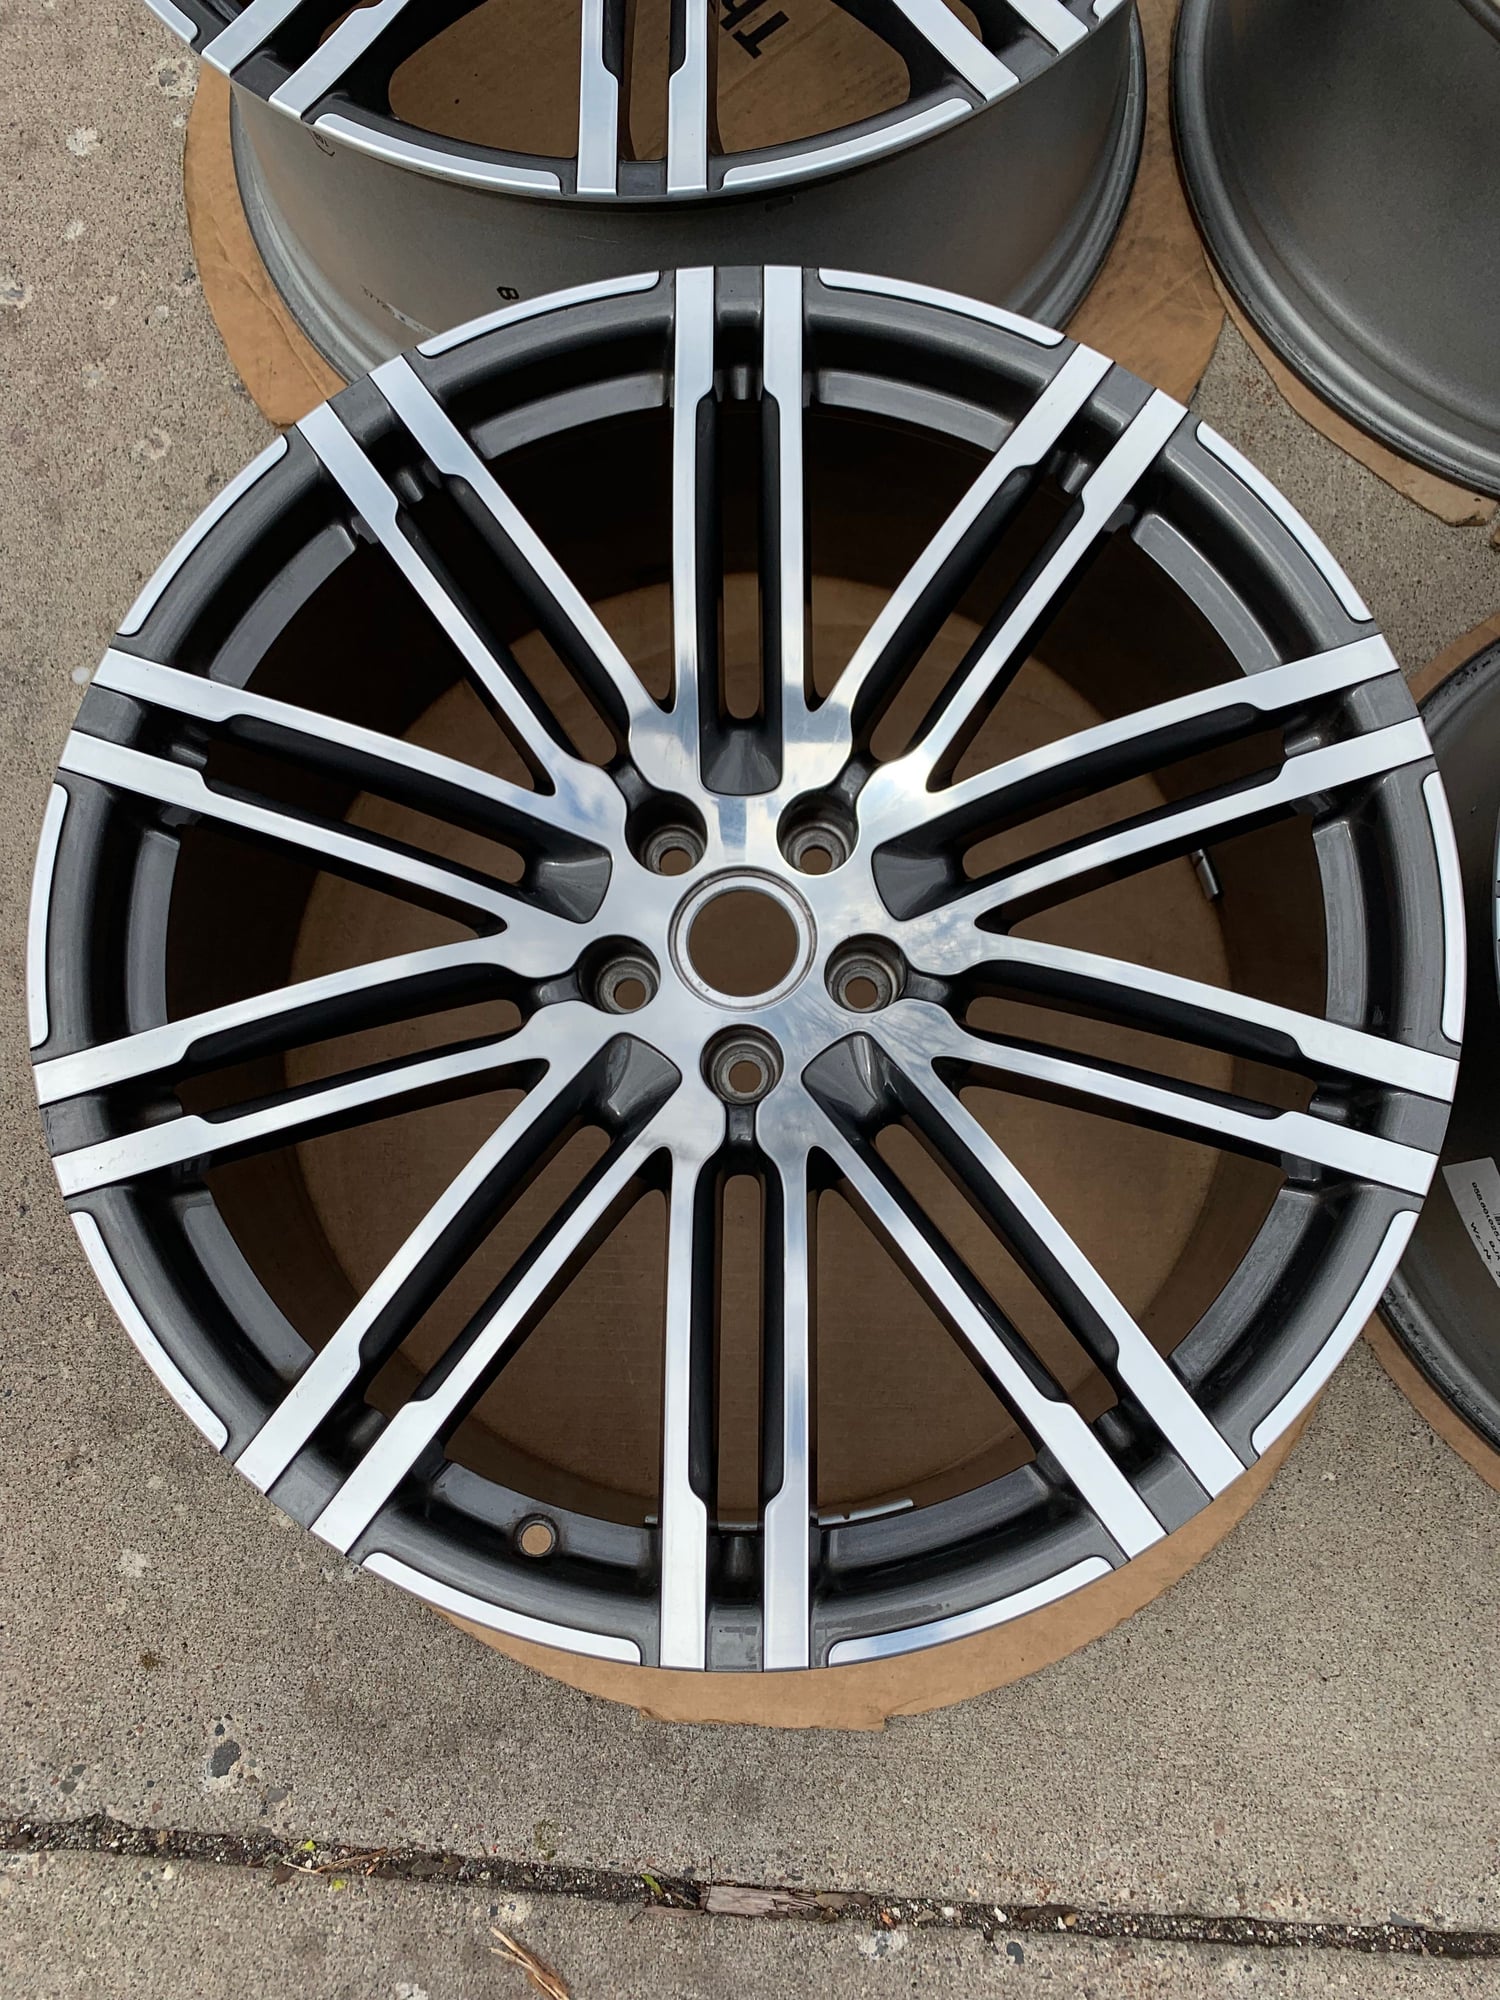 Wheels and Tires/Axles - OEM 21" Porsche Macan Turbo Wheels - Excellent - 95B - Used - 2014 to 2019 Porsche Macan - Chanhassen, MN 55317, United States